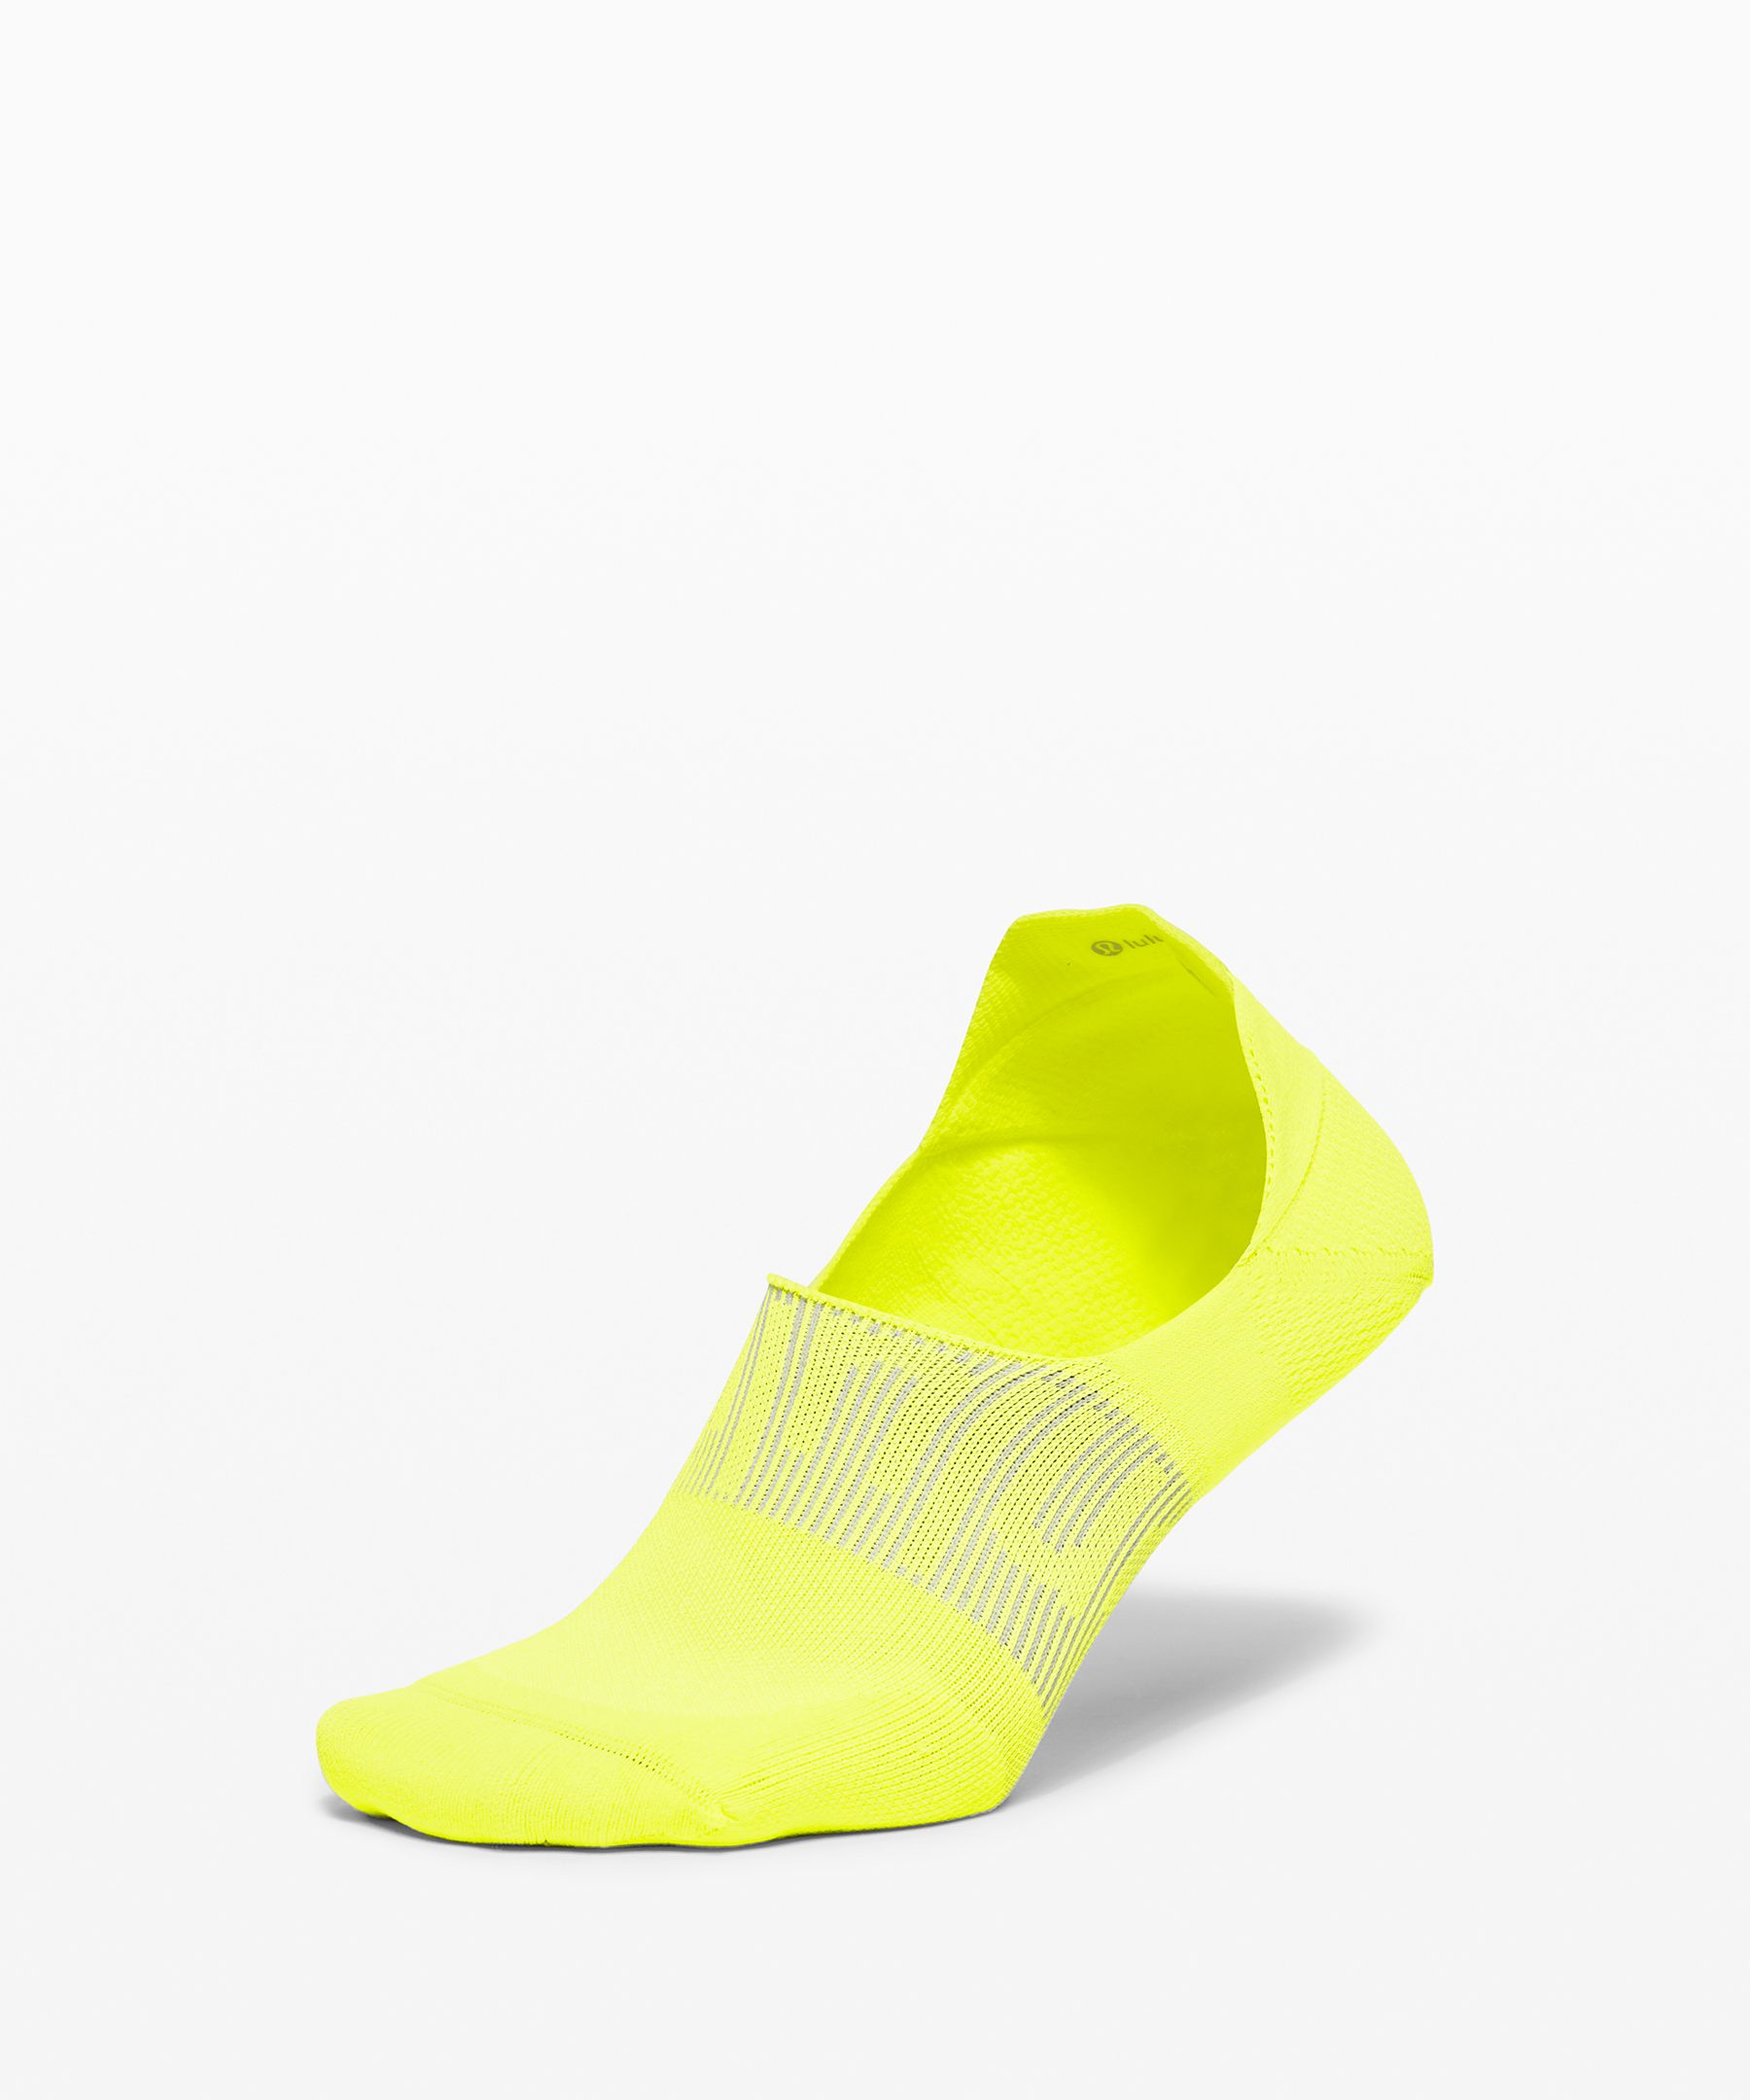 Lululemon Power Stride No Show Sock With Active Grip In Yellow